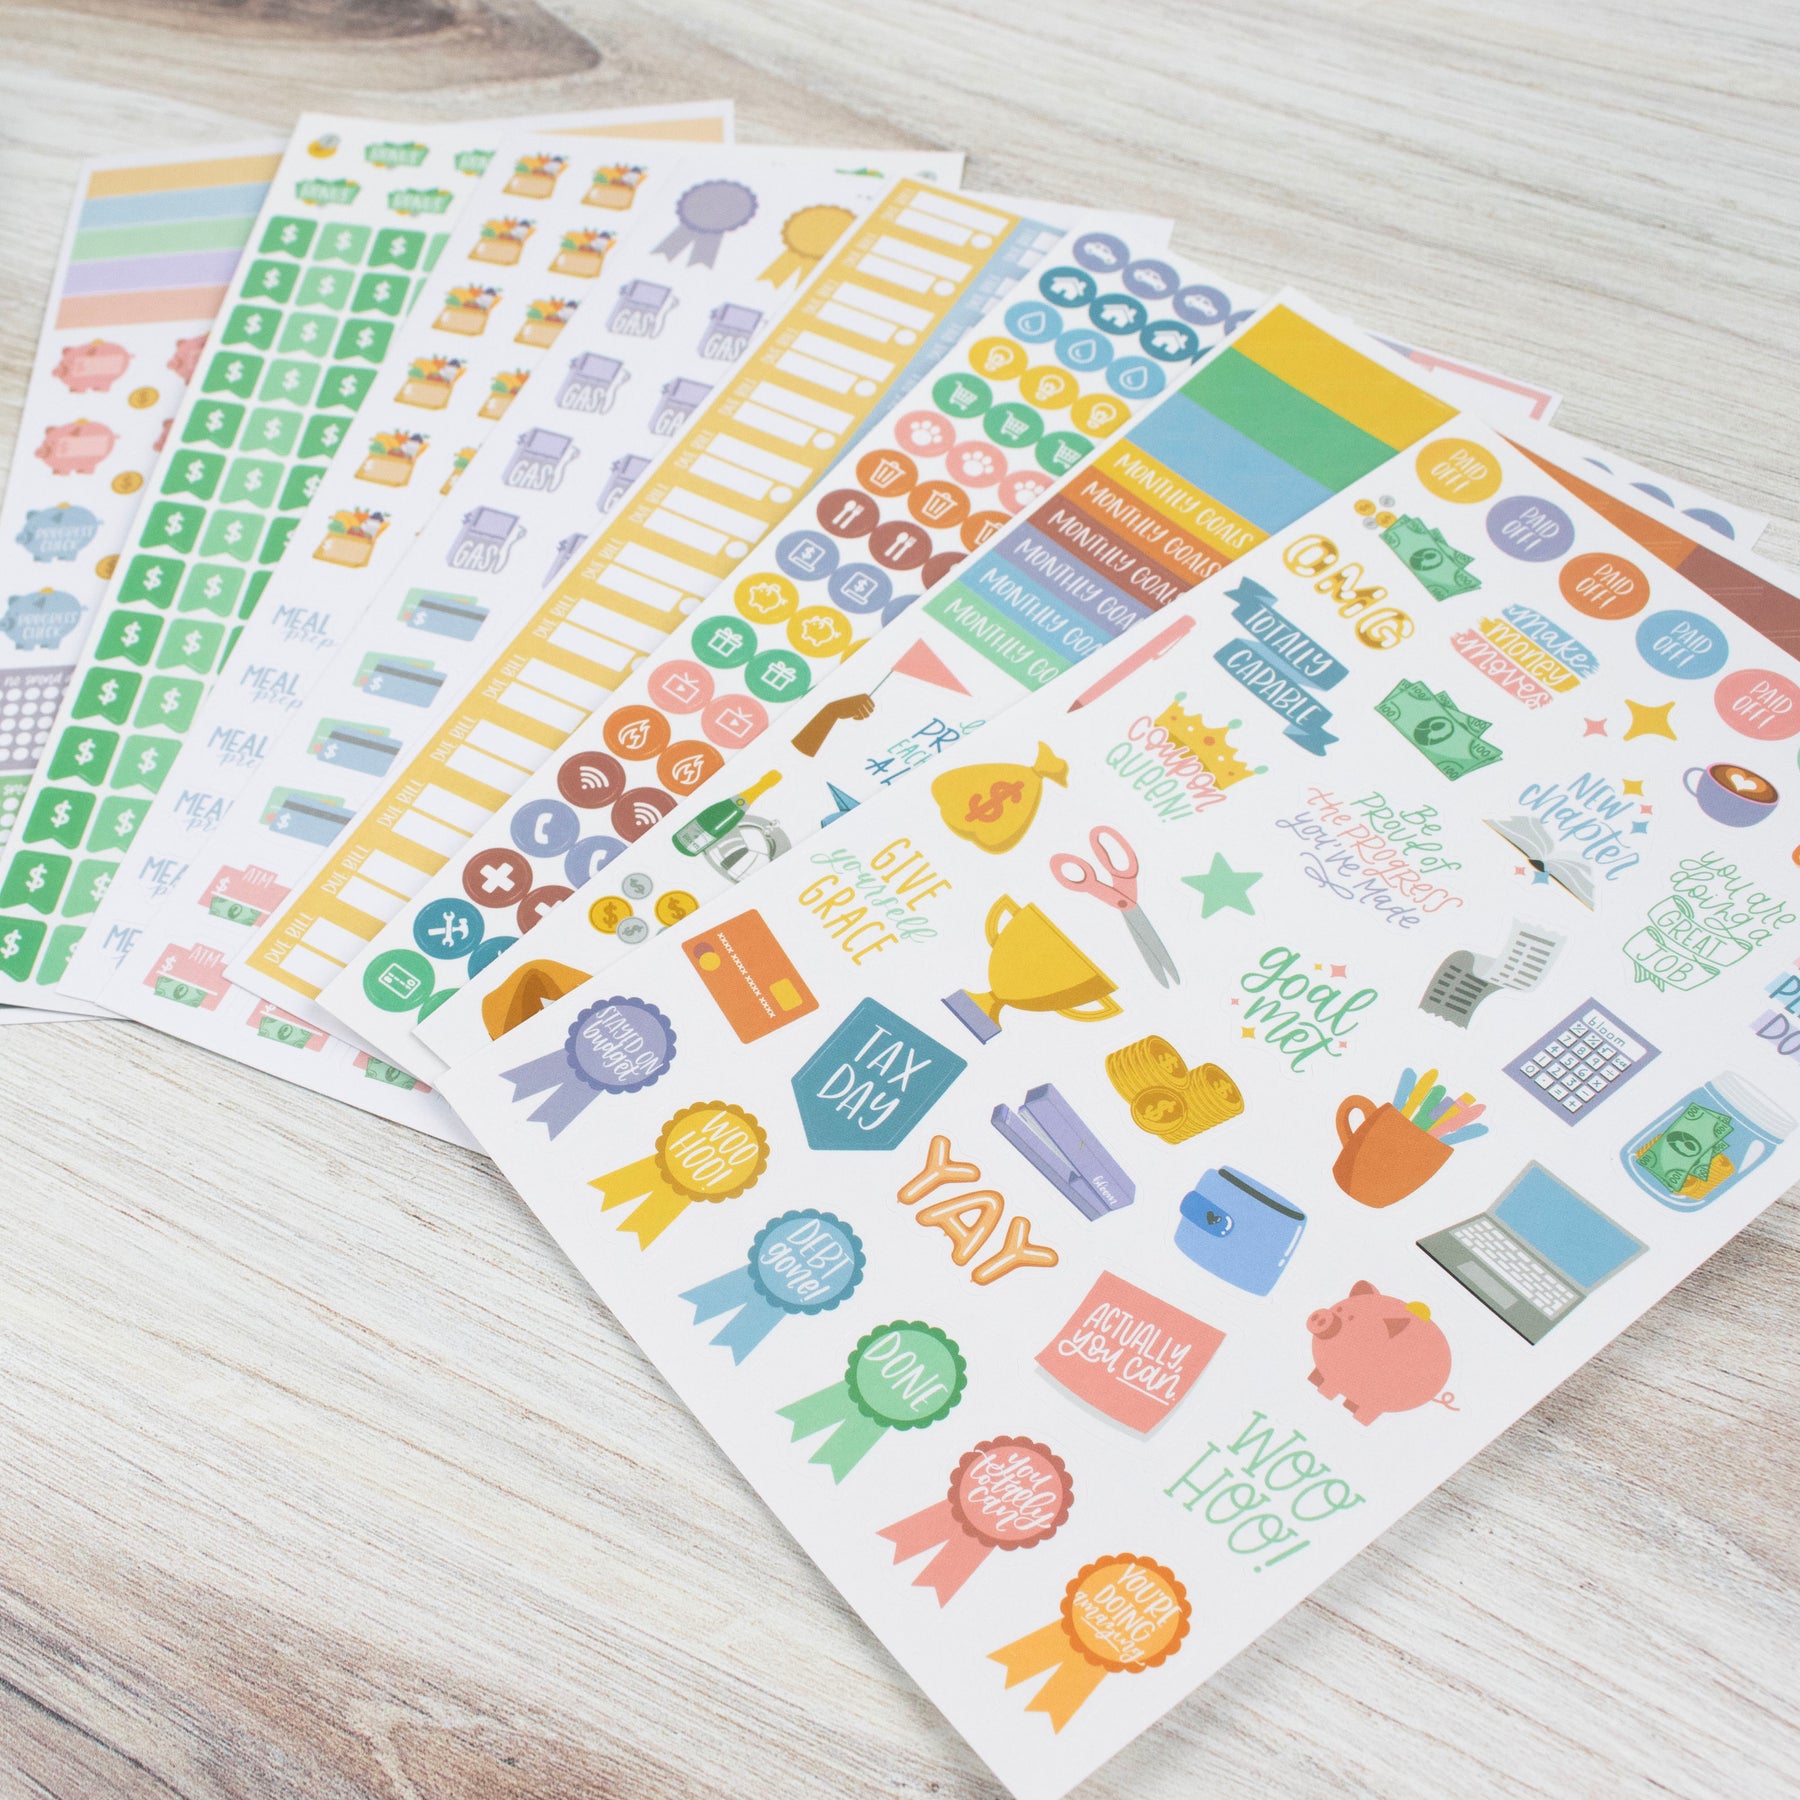 bloom daily planners Sticker Sheets, Teacher Planner Stickers V2